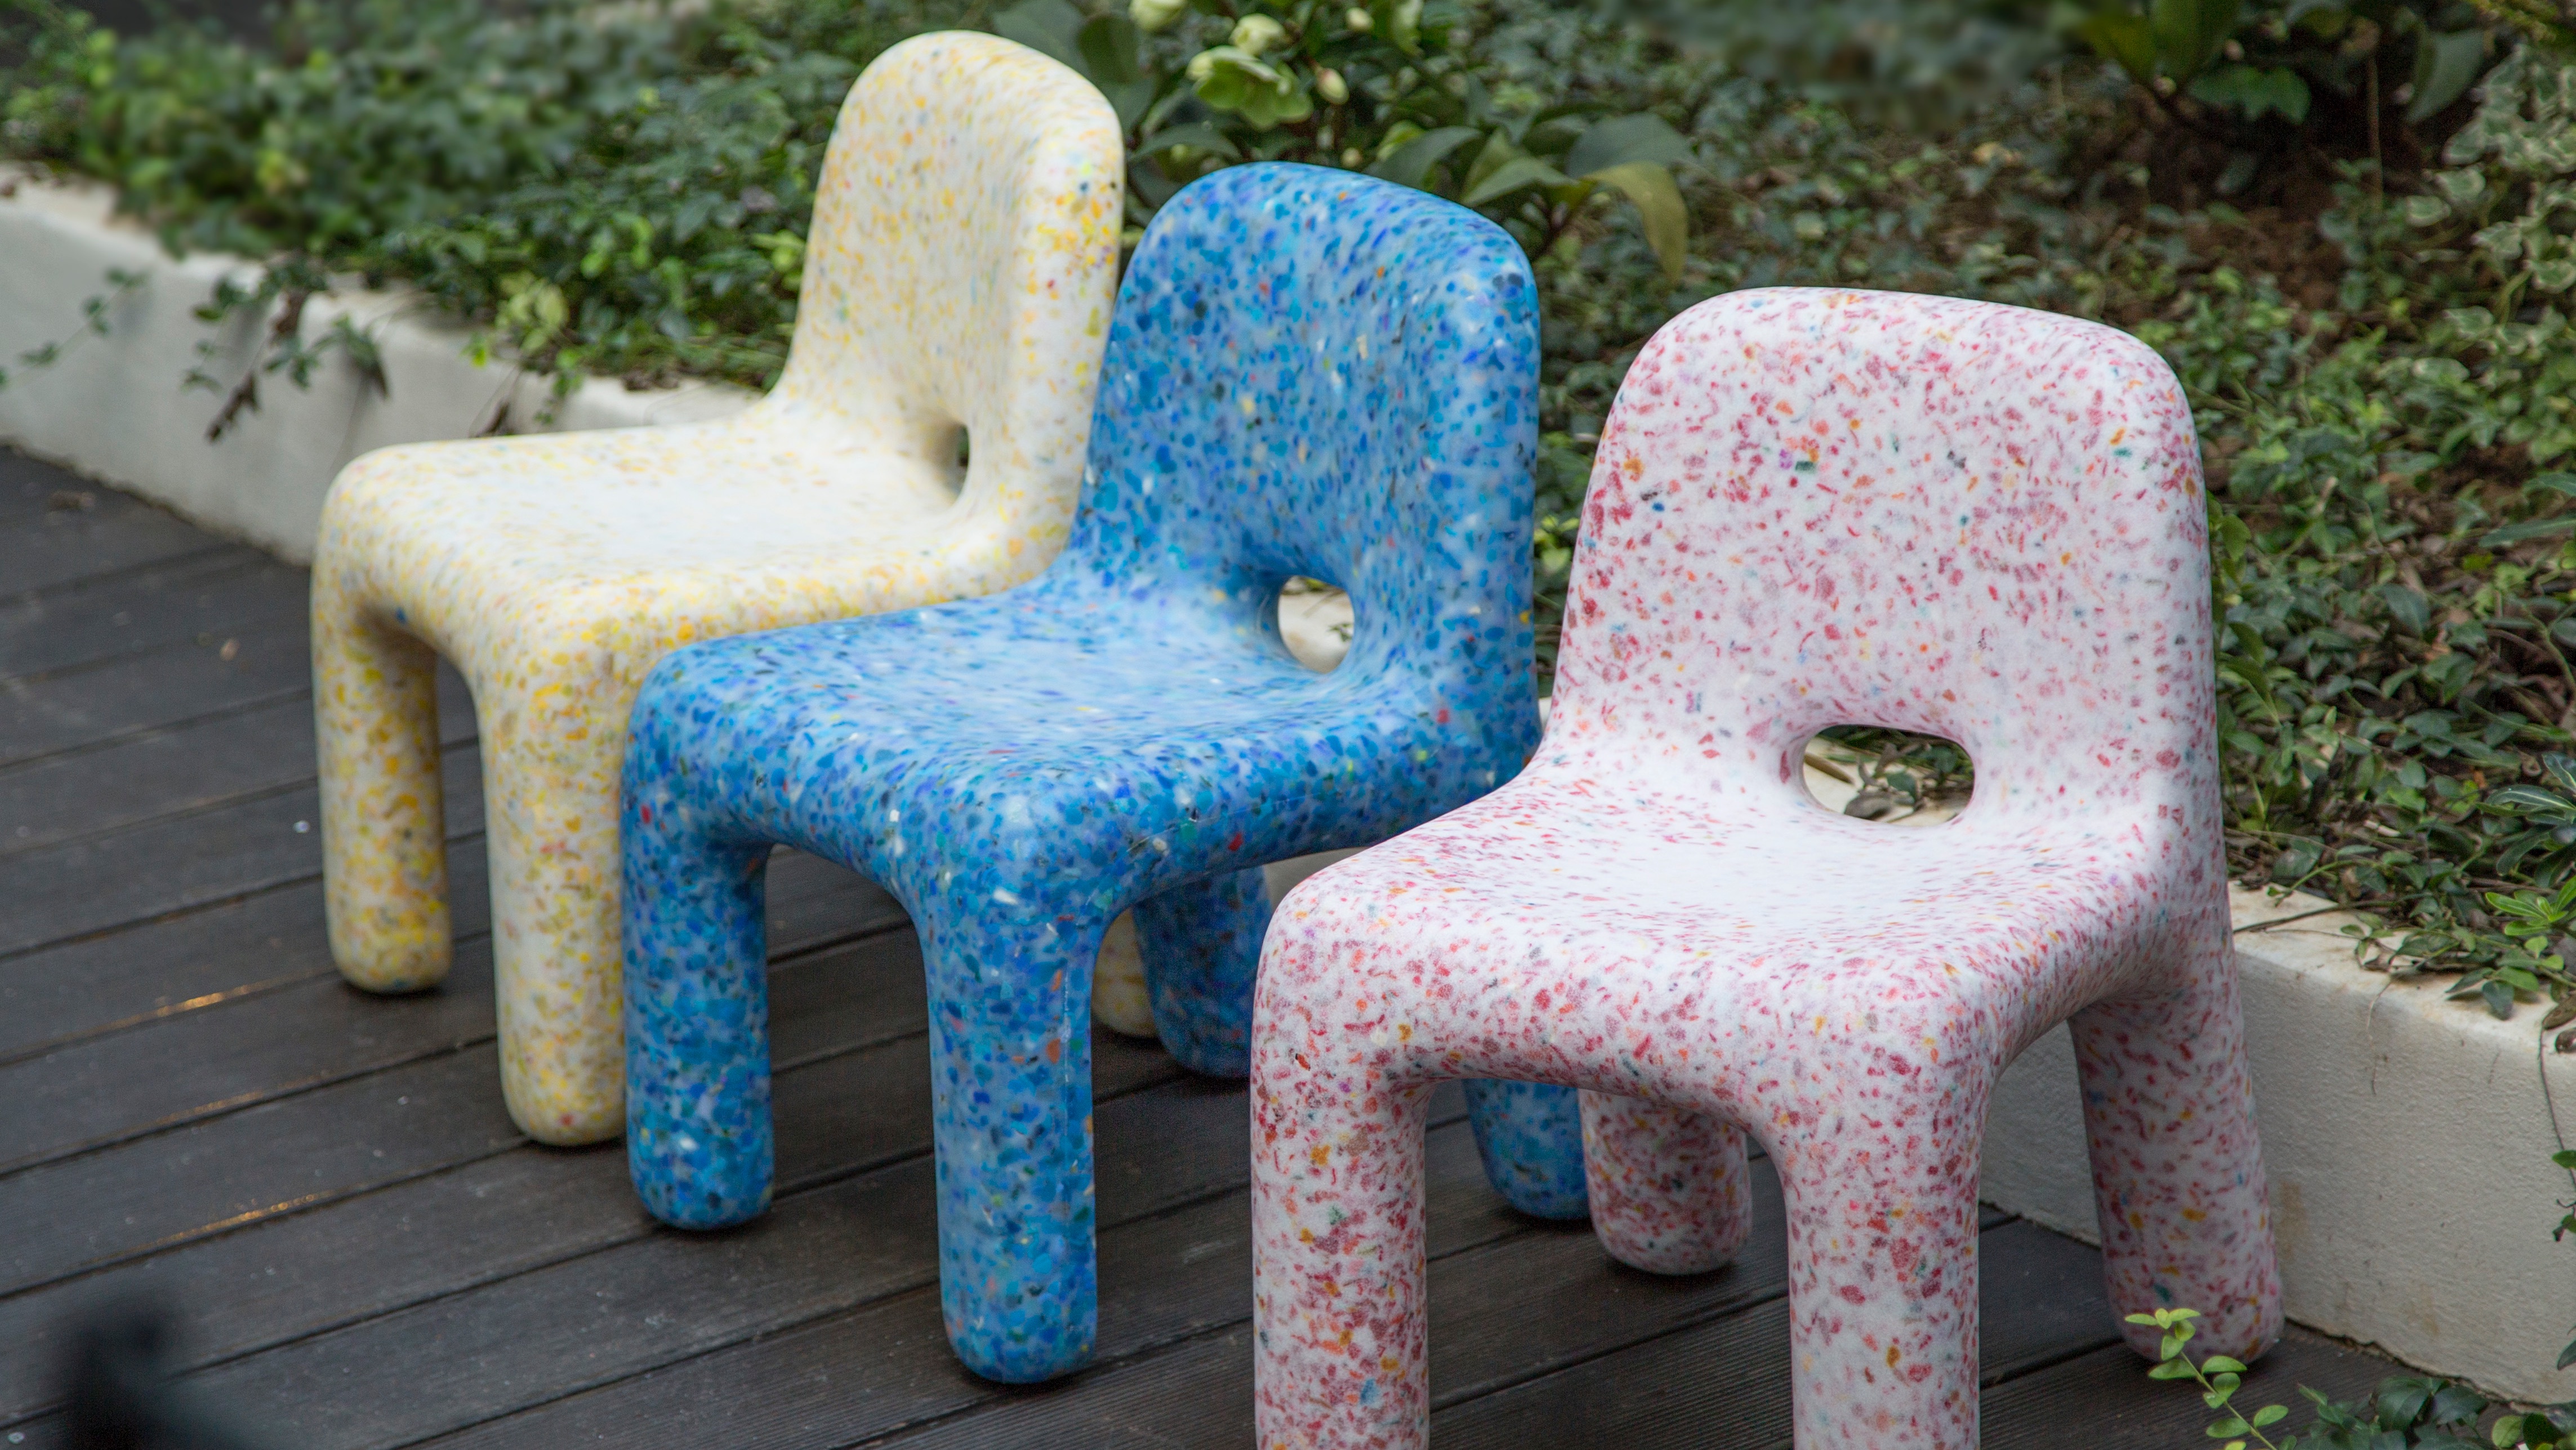 Recycled Plastic Toys Transformed into Kidsâ Furniture | Stylus